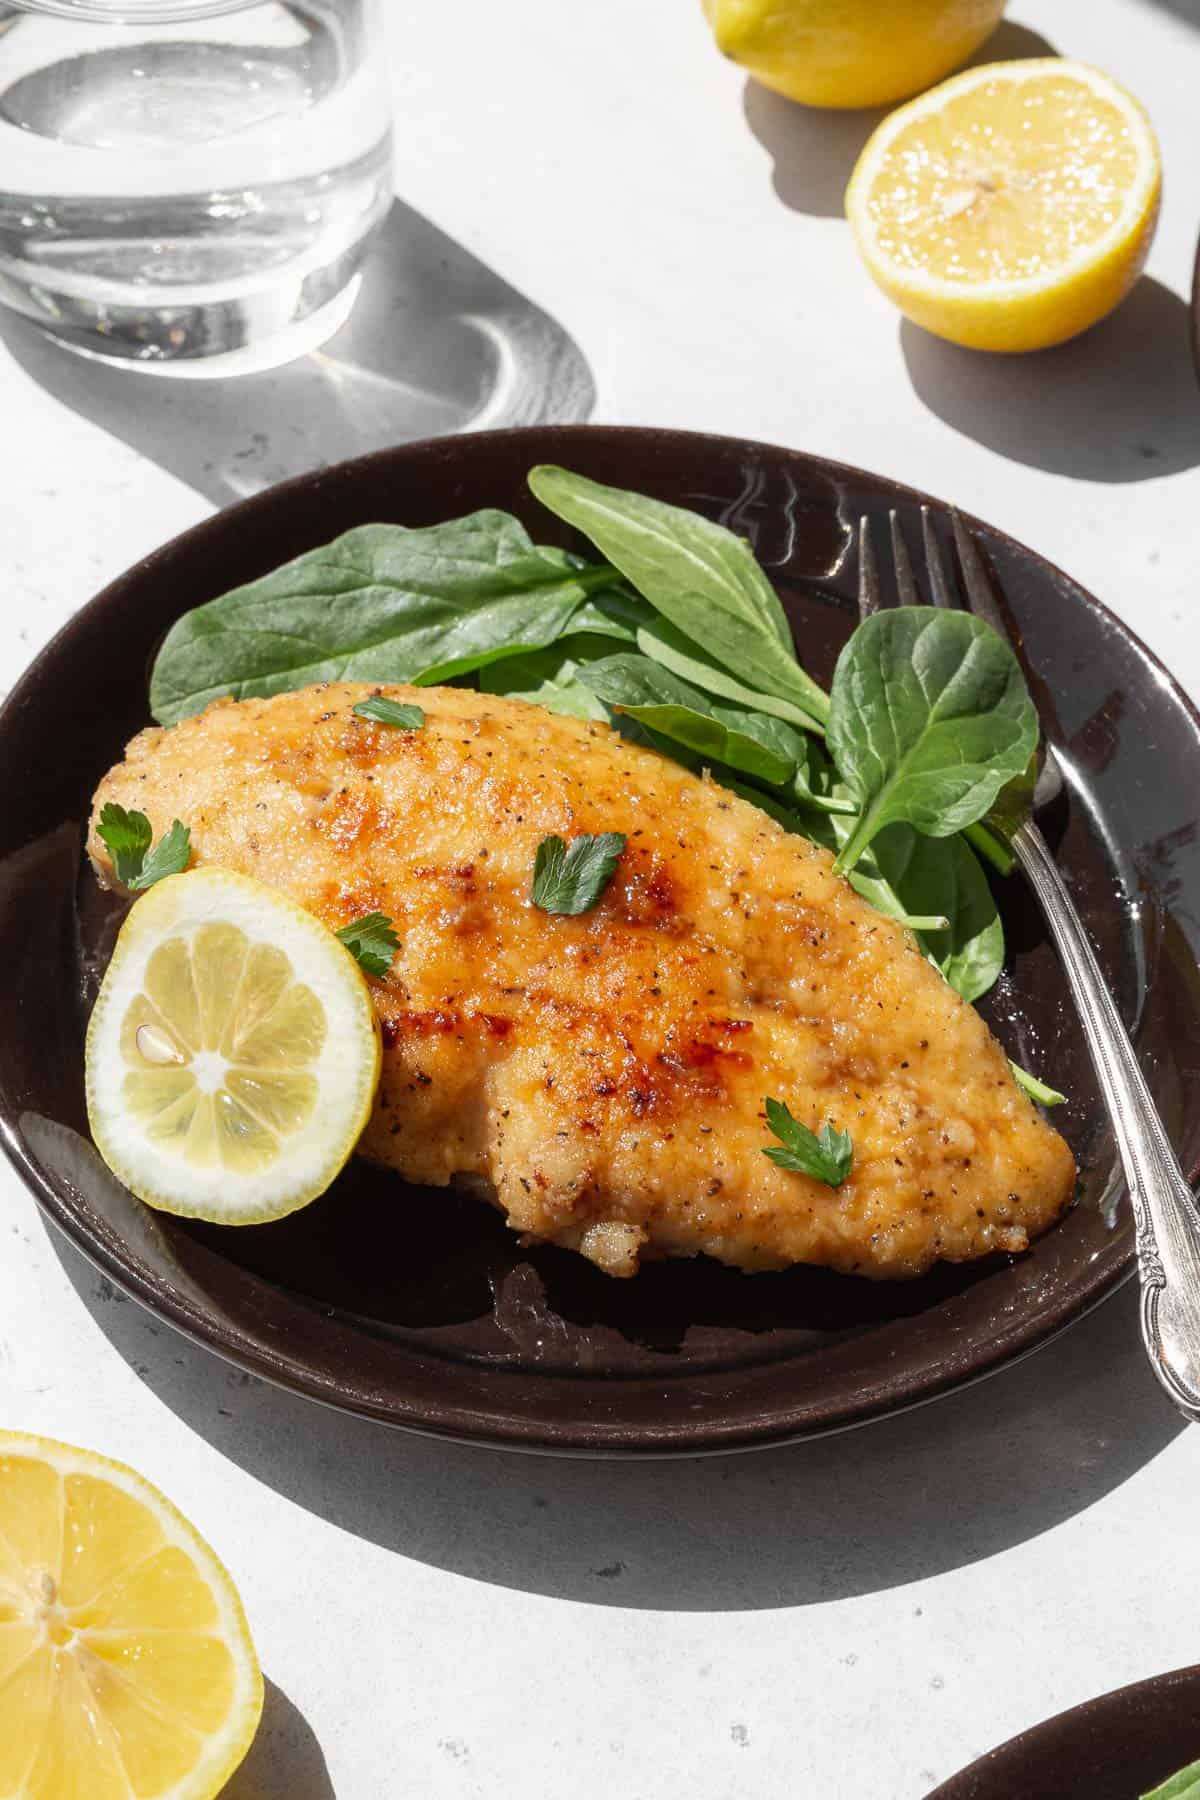 45 degree angle shot of a serving of lemony Italian chicken al limone on a black plate garnished with a slice of lemon and fresh parsley next to a simple spinach salad.